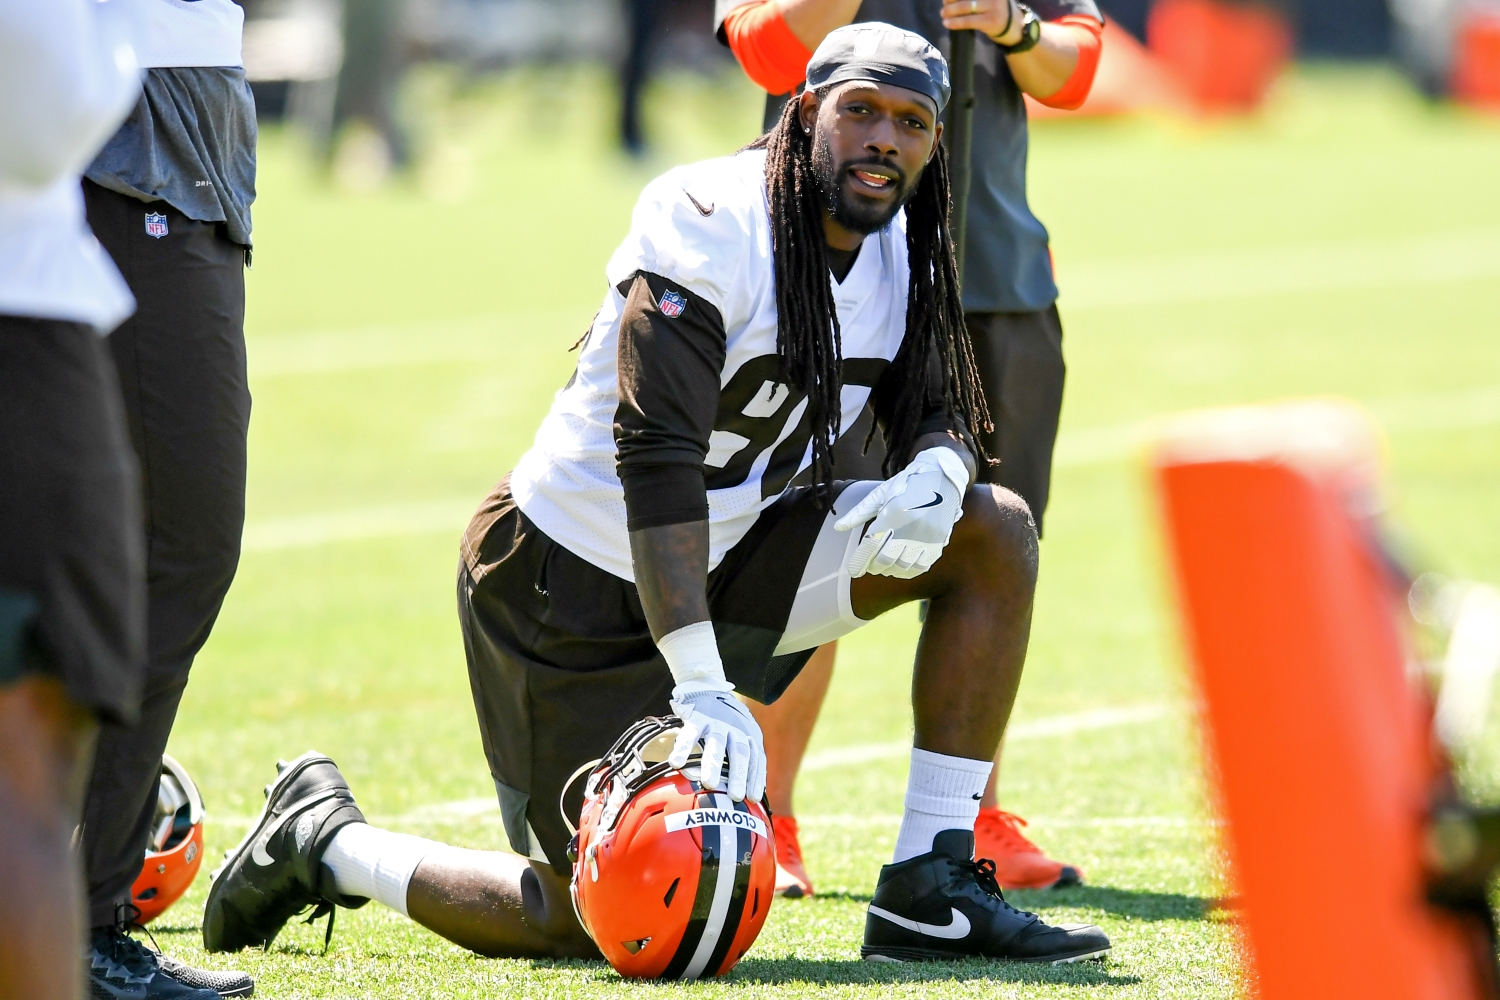 Jadeveon Clowney takes a knee during Cleveland Browns mini camp practice.